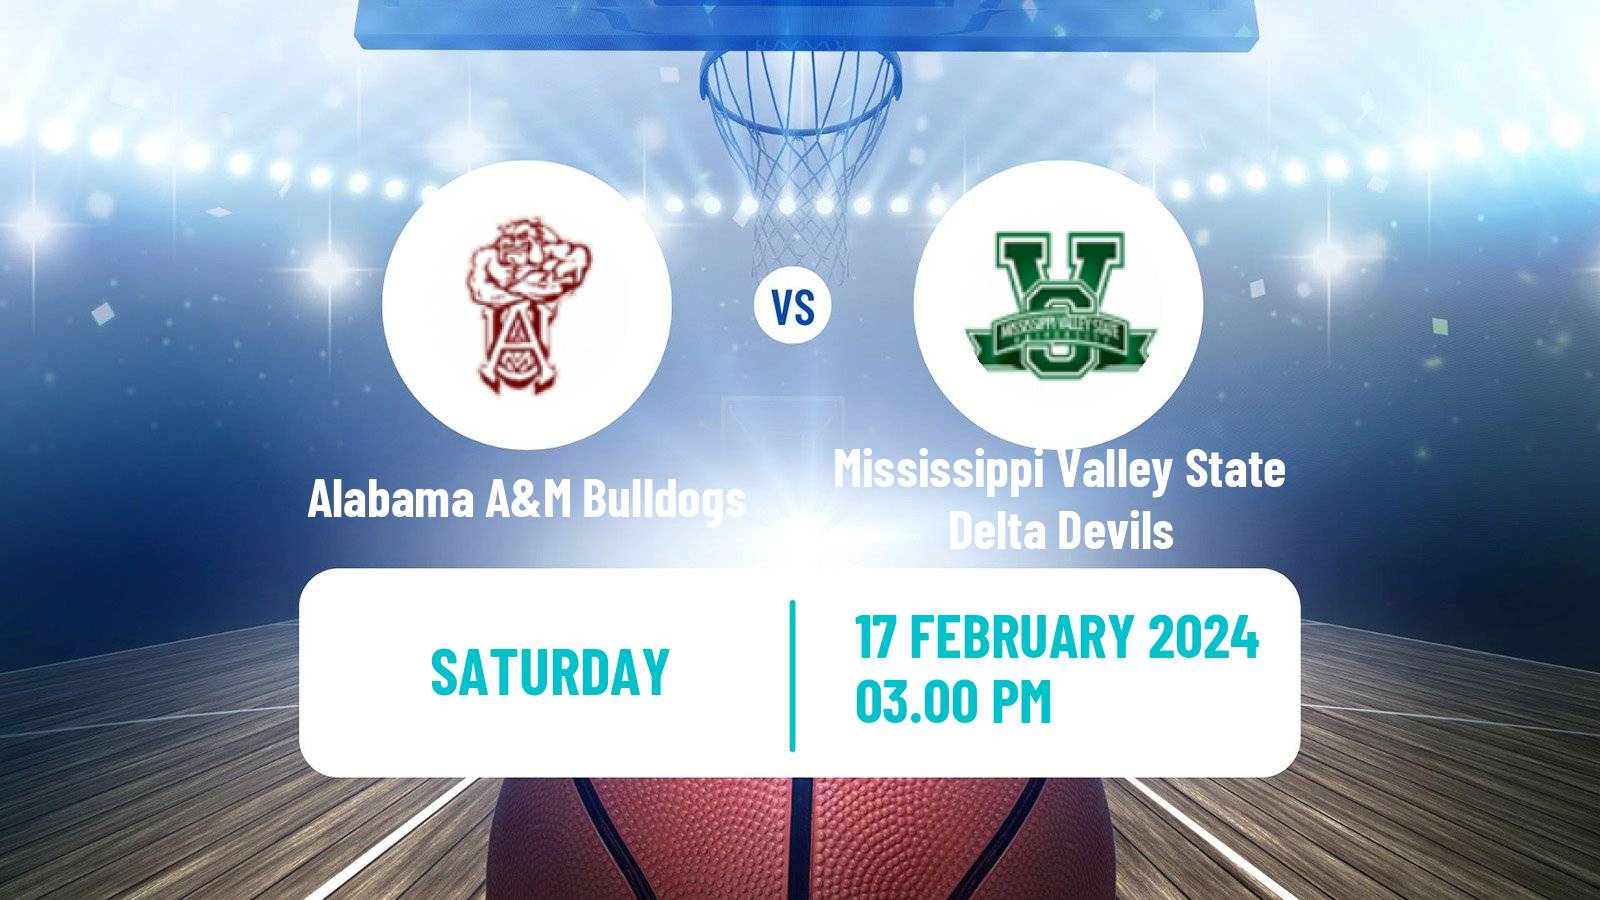 Basketball NCAA College Basketball Alabama A&M Bulldogs - Mississippi Valley State Delta Devils